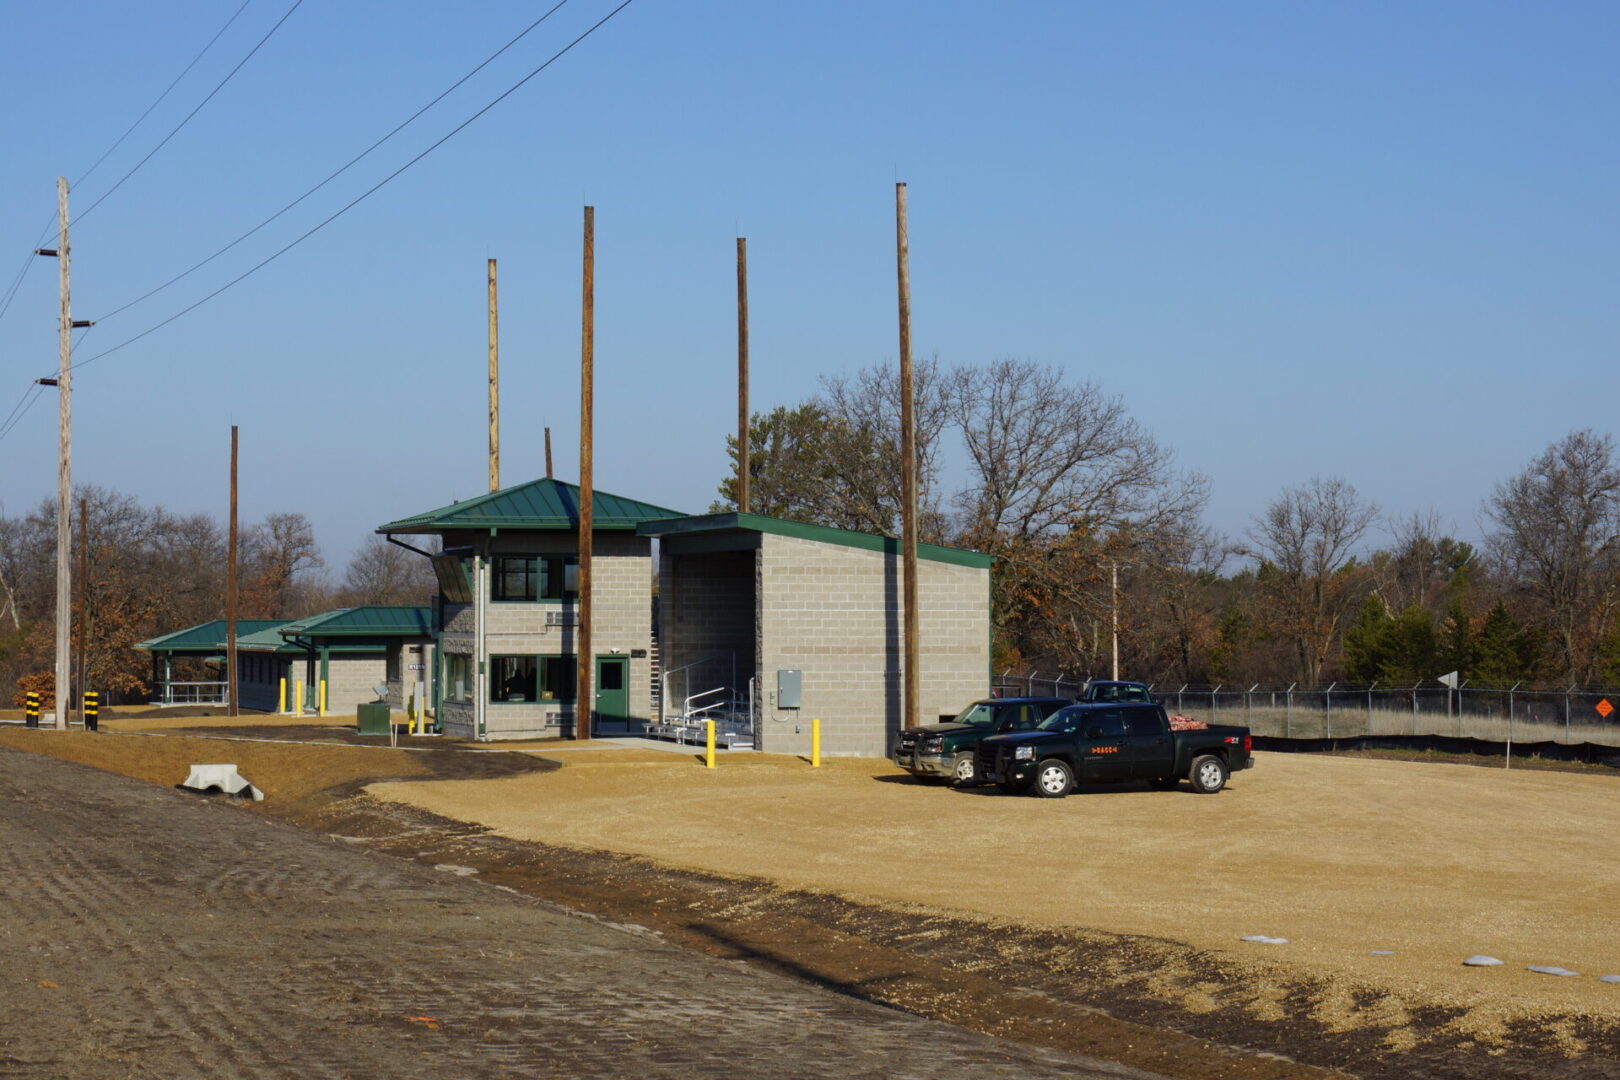 An industrial facility with a fenced perimeter and a truck parked outside.